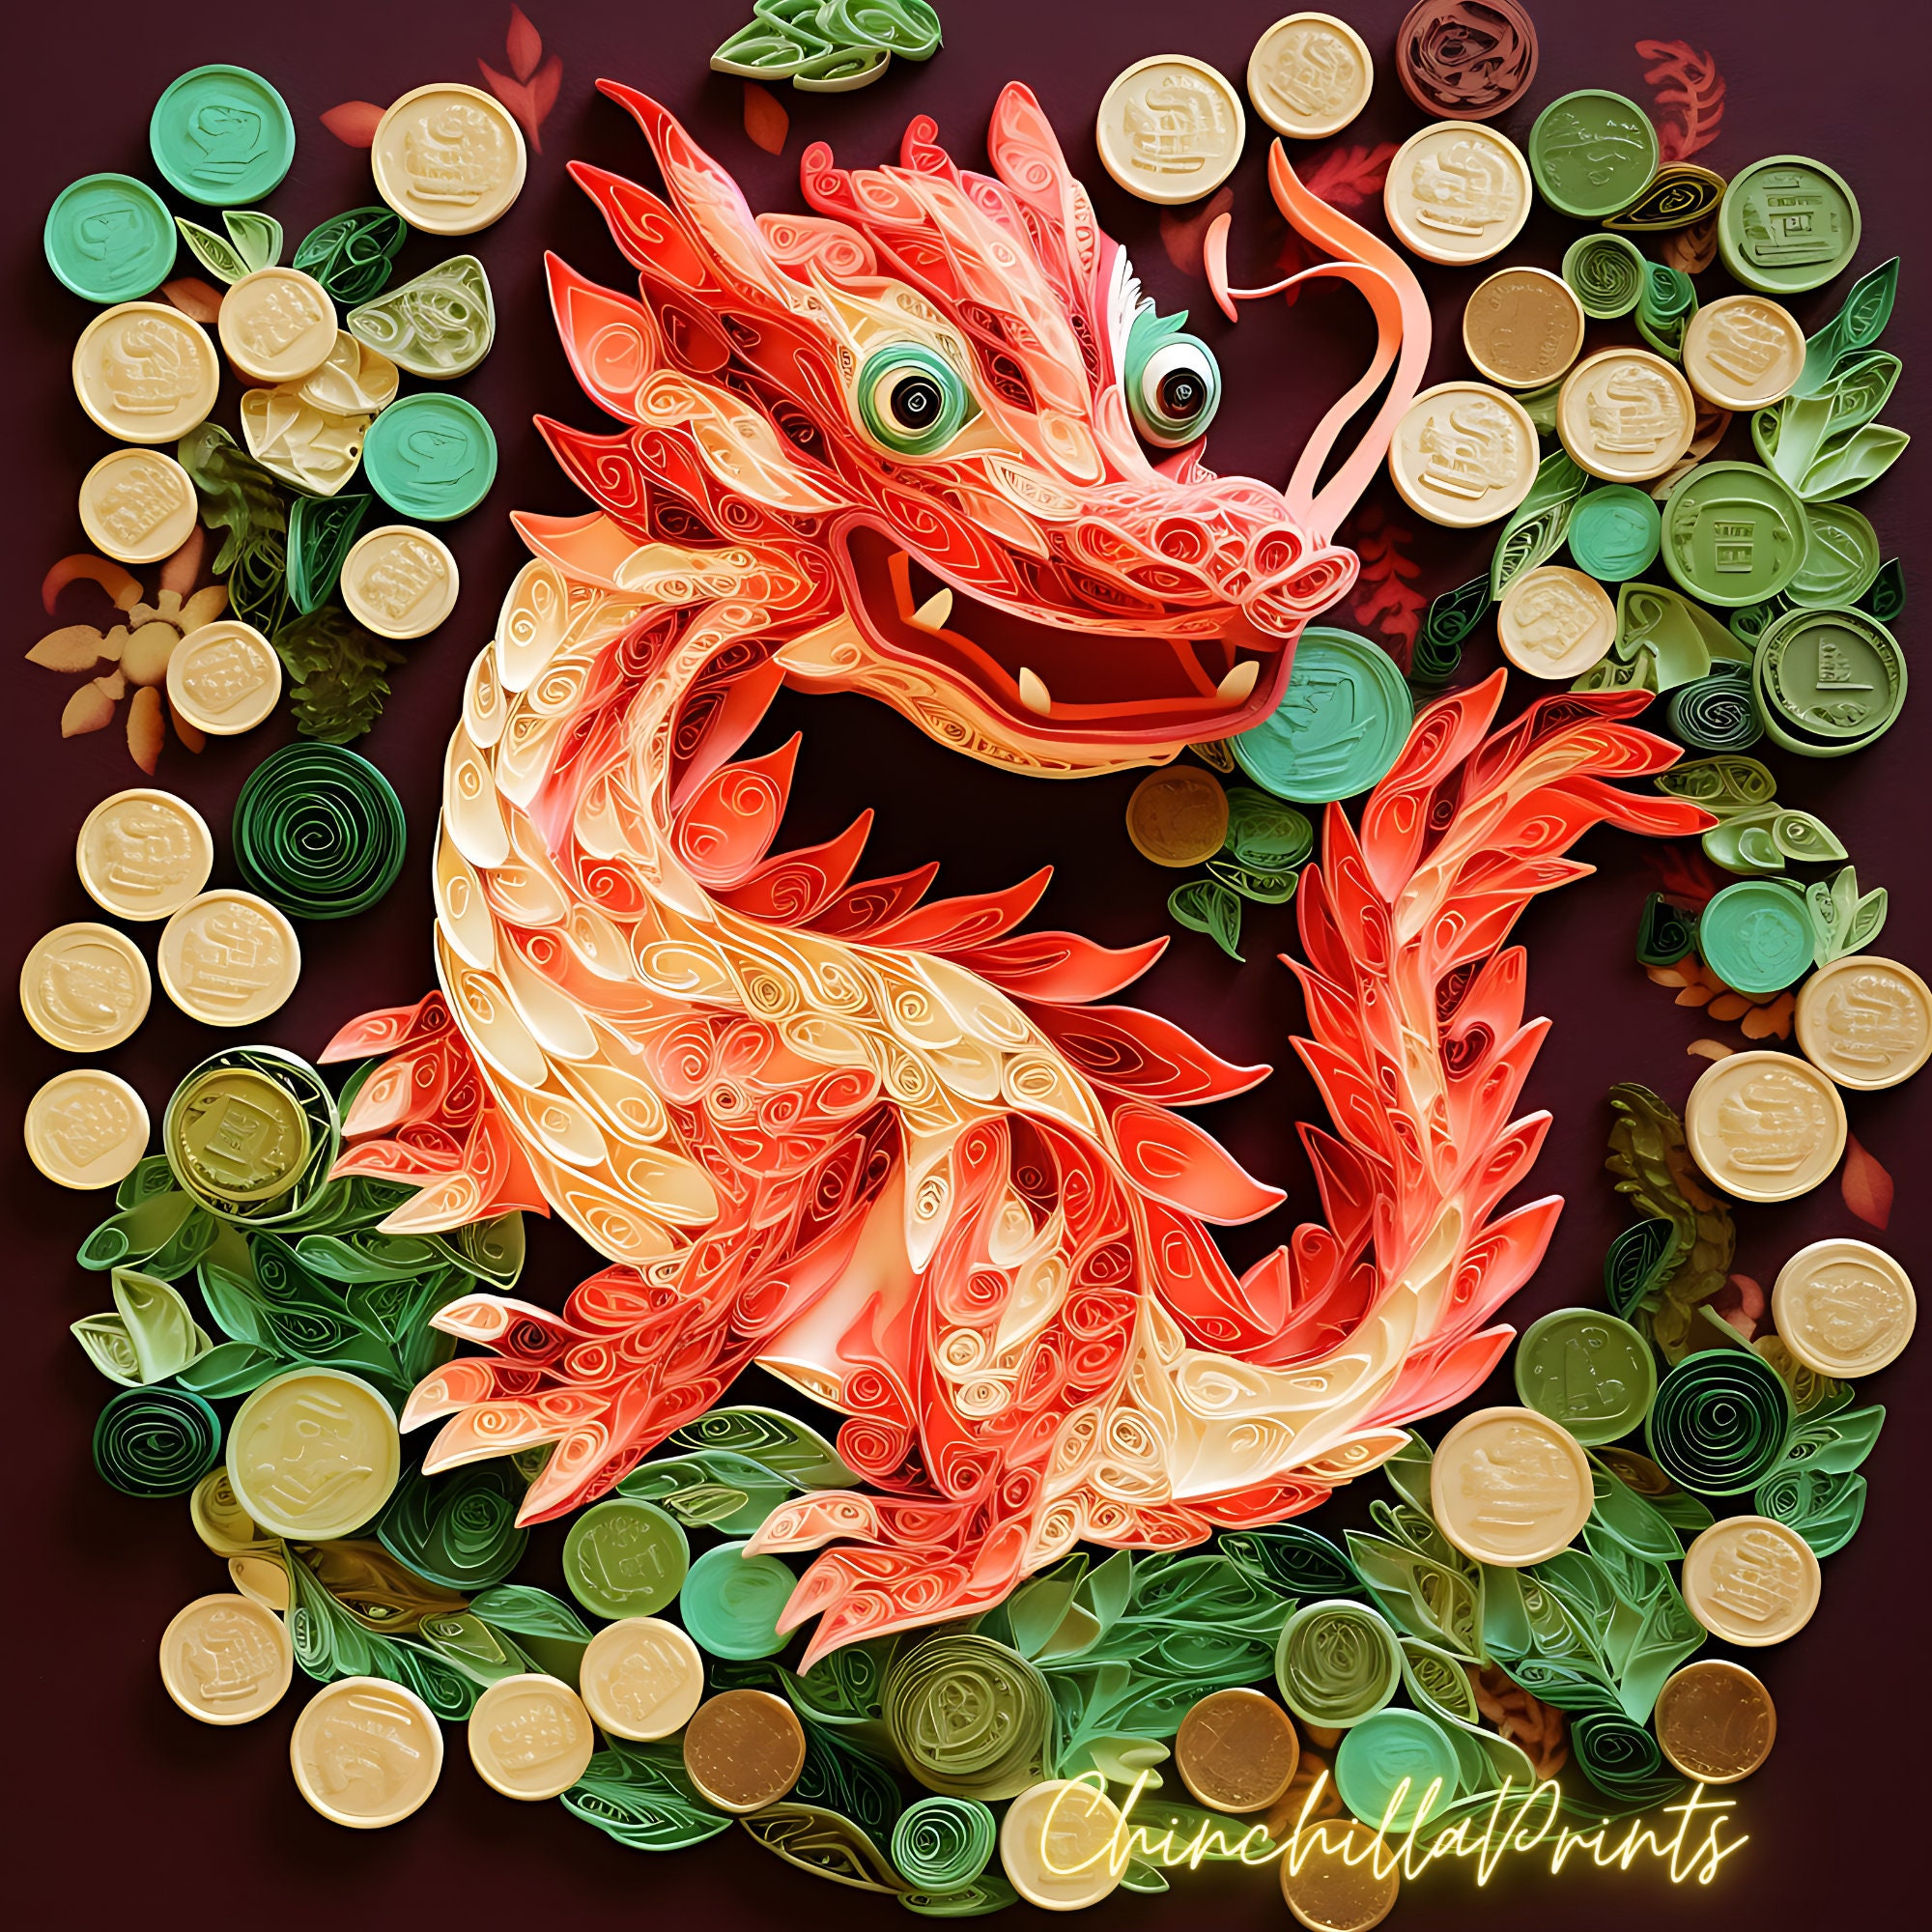 Quilling paper art of a symmetrical dragon with multiple horns on